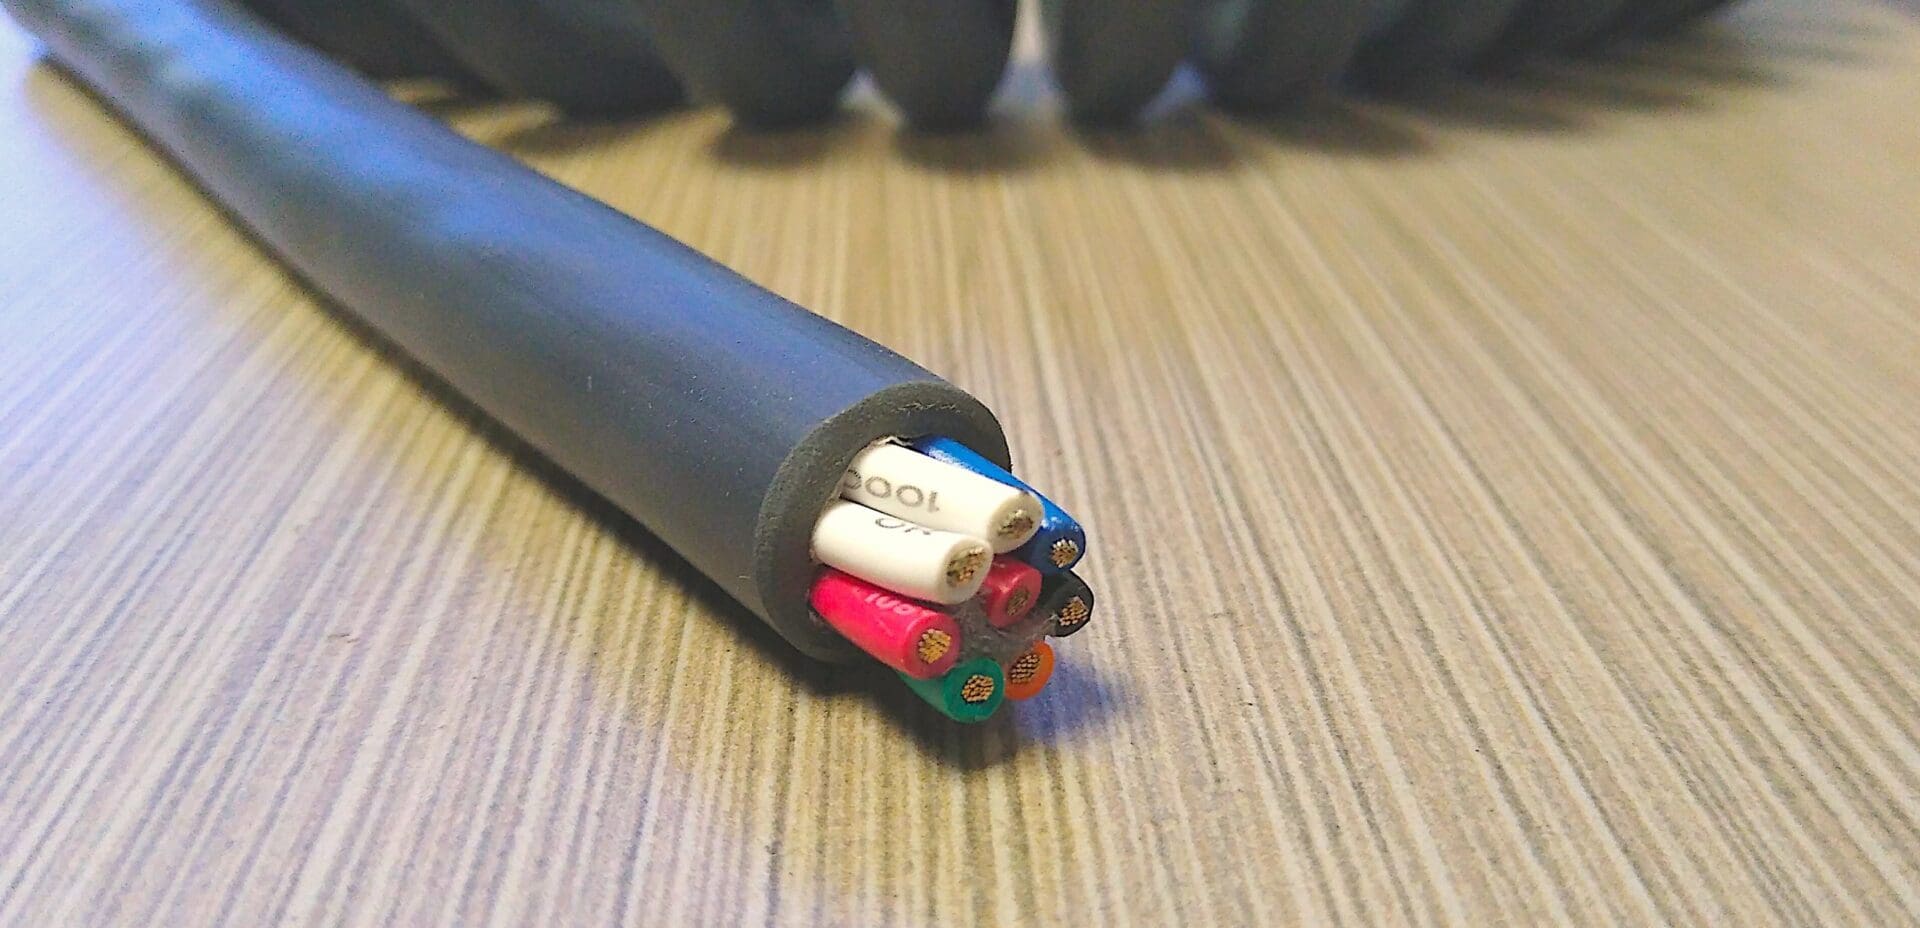 A PCO168 - Power Coiled Cord 16 Gauge with 8 Conductors - Non-Shielded - 600 Volts cable with different colored wires on it.